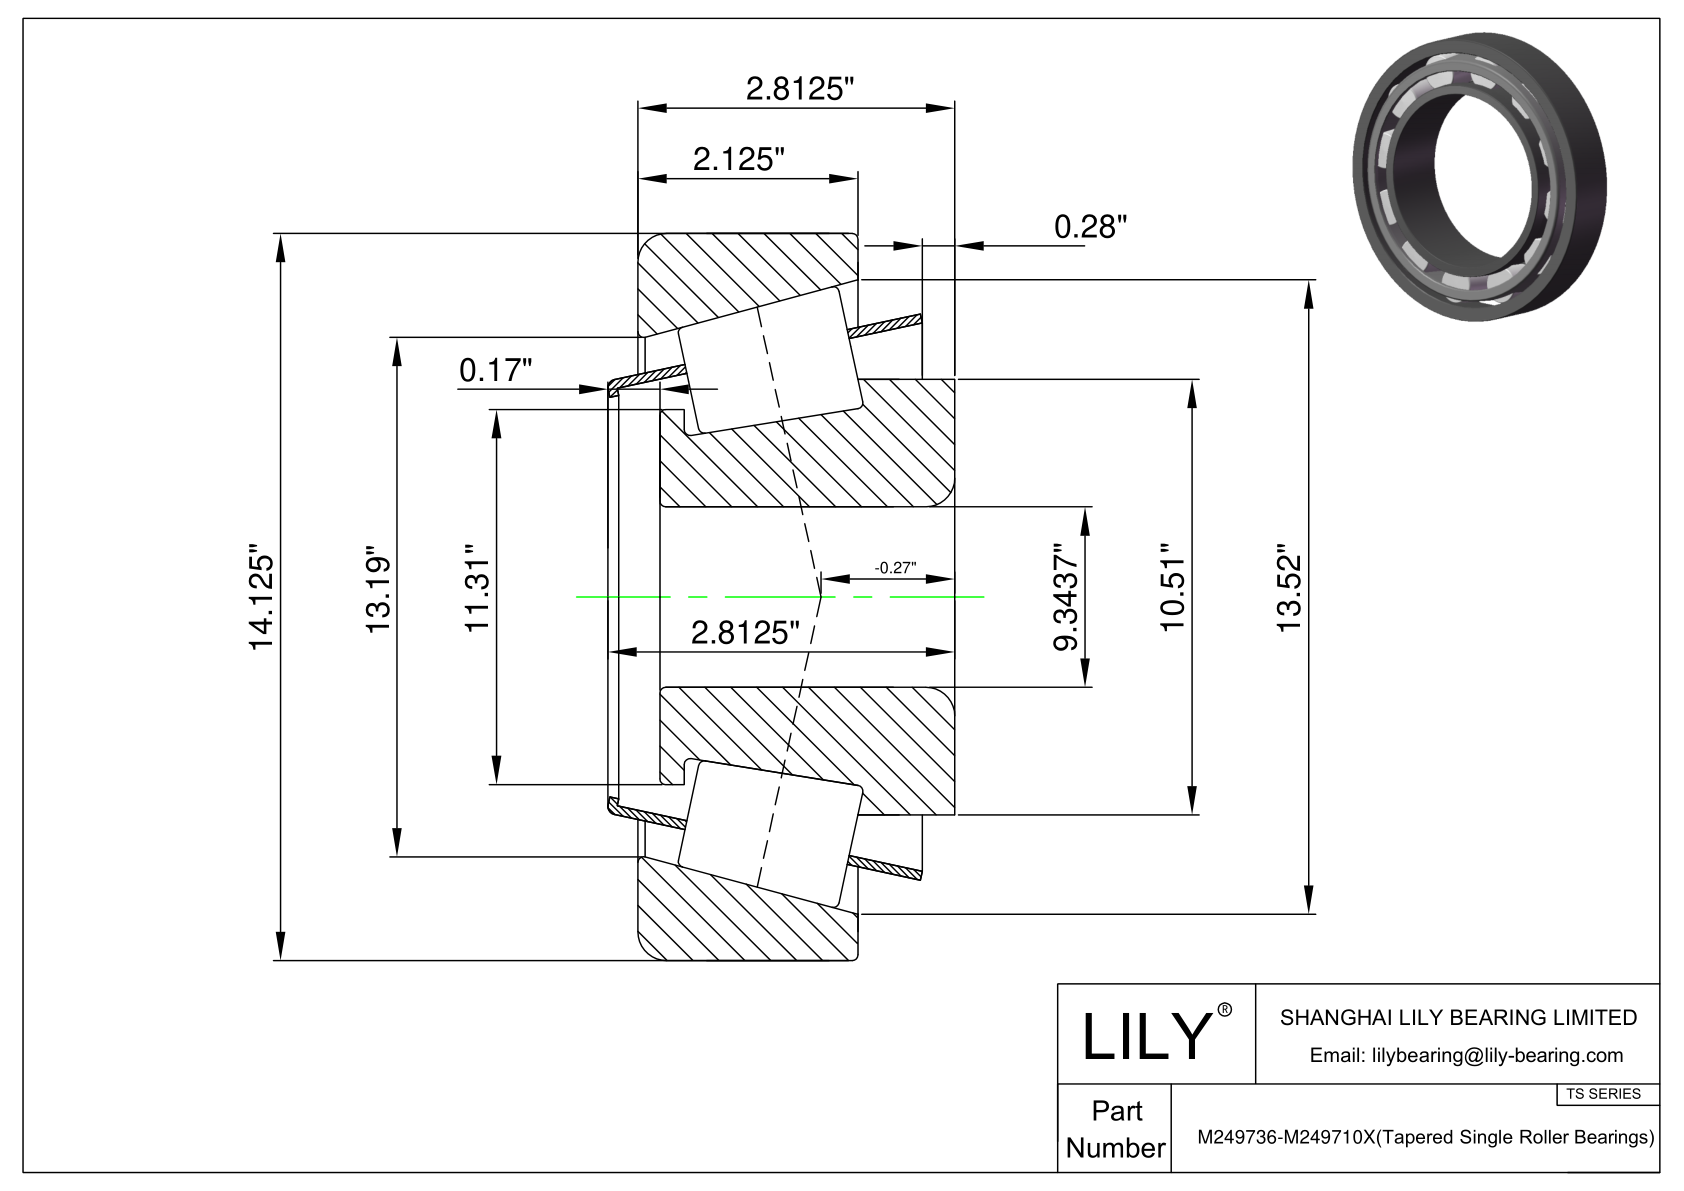 M249736-M249710X TS (Tapered Single Roller Bearings) (Imperial) cad drawing